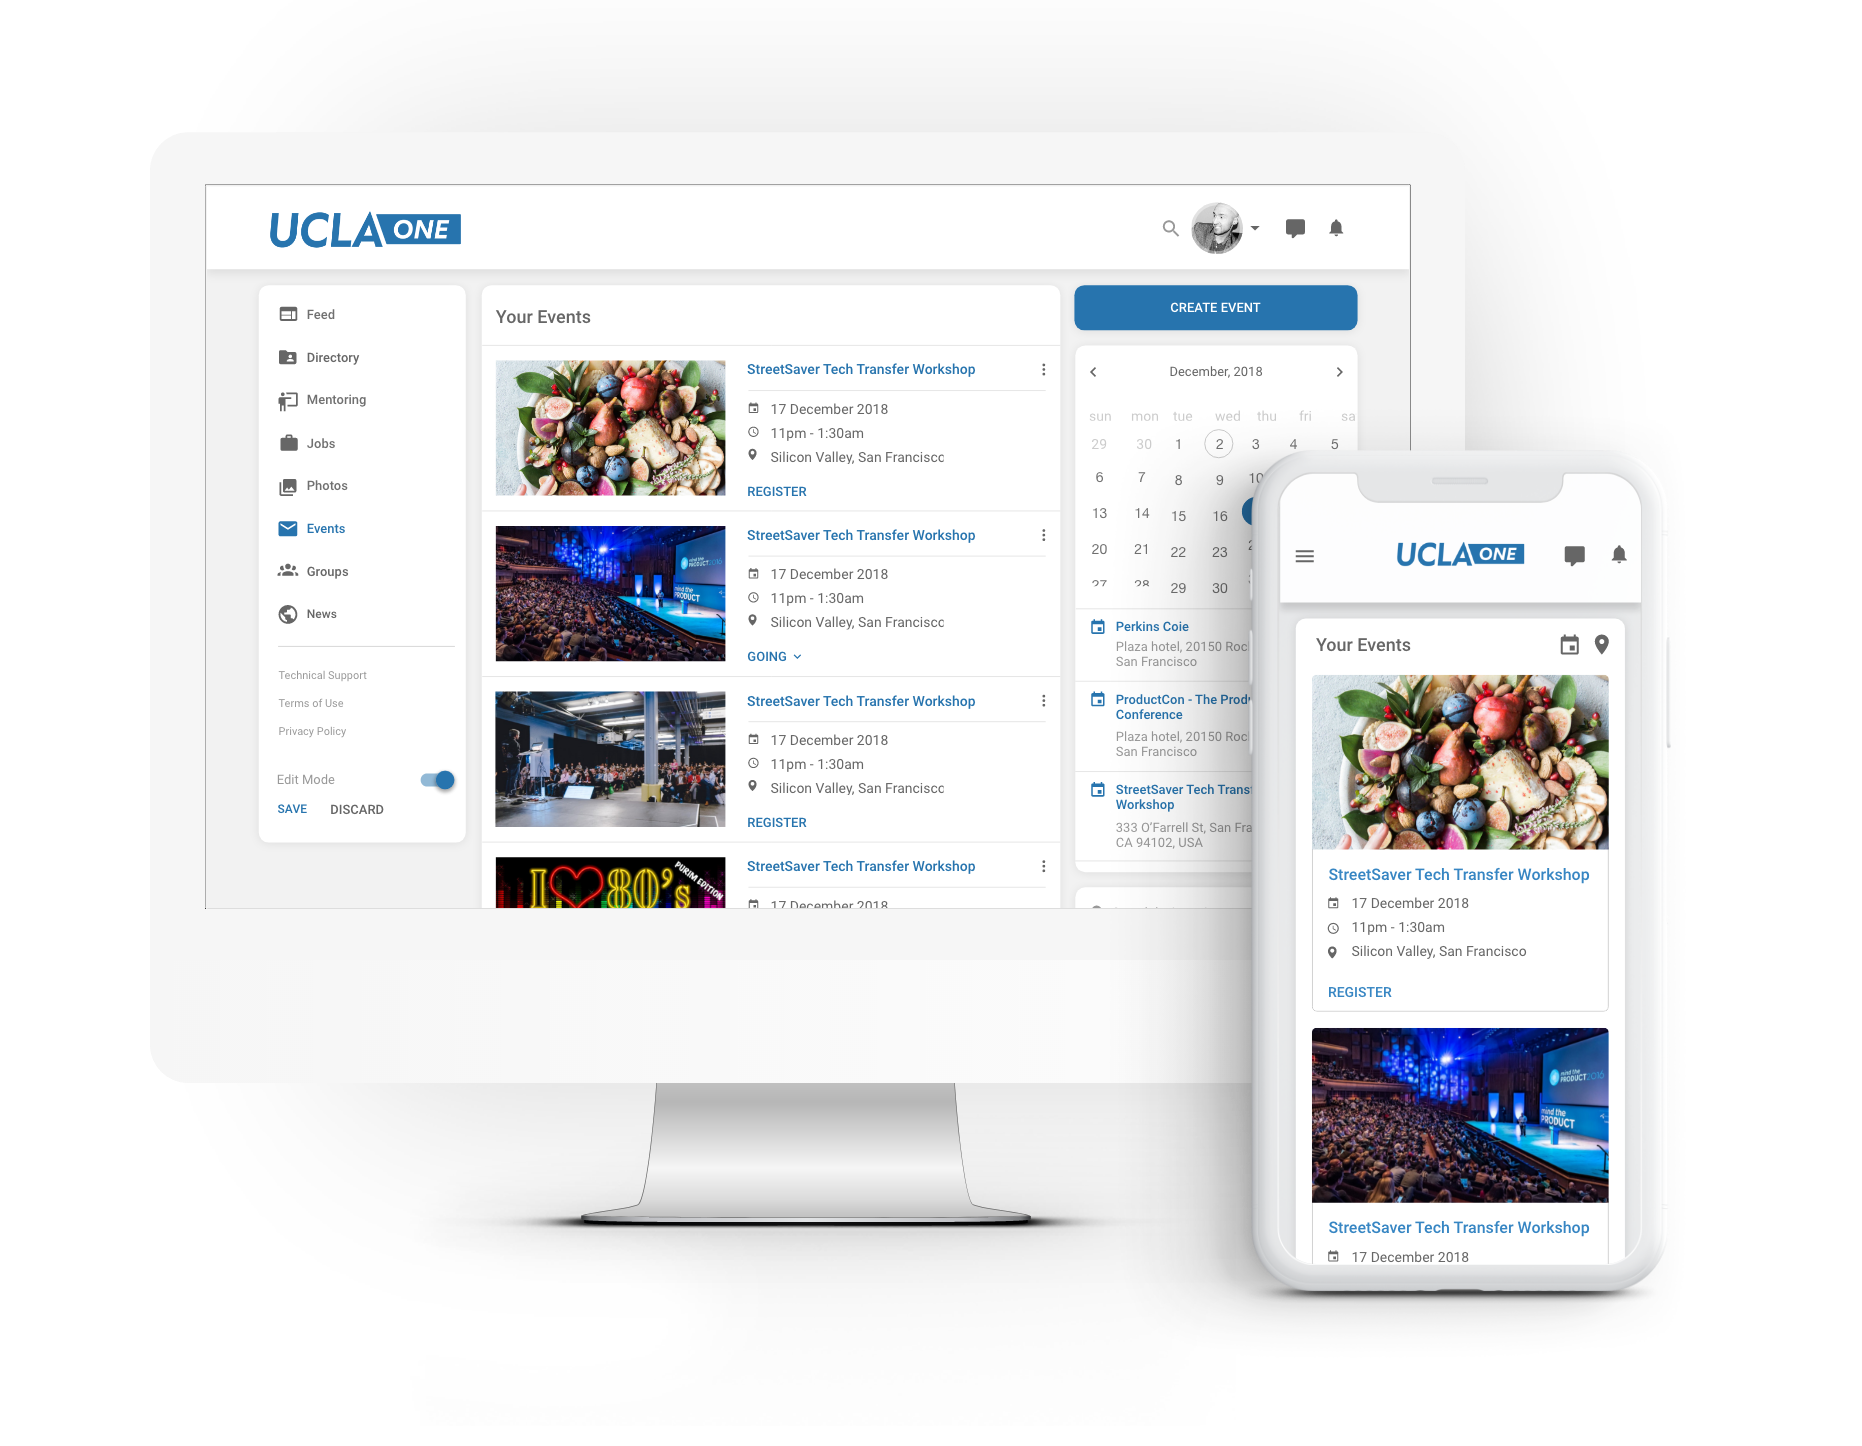 Fundraising event, annual gathering, networking luncheon - centralize all your event information in one, easy to access place. Our events module integrates with your 3rd party RSS feed to ensure your alumni don’t miss a beat!